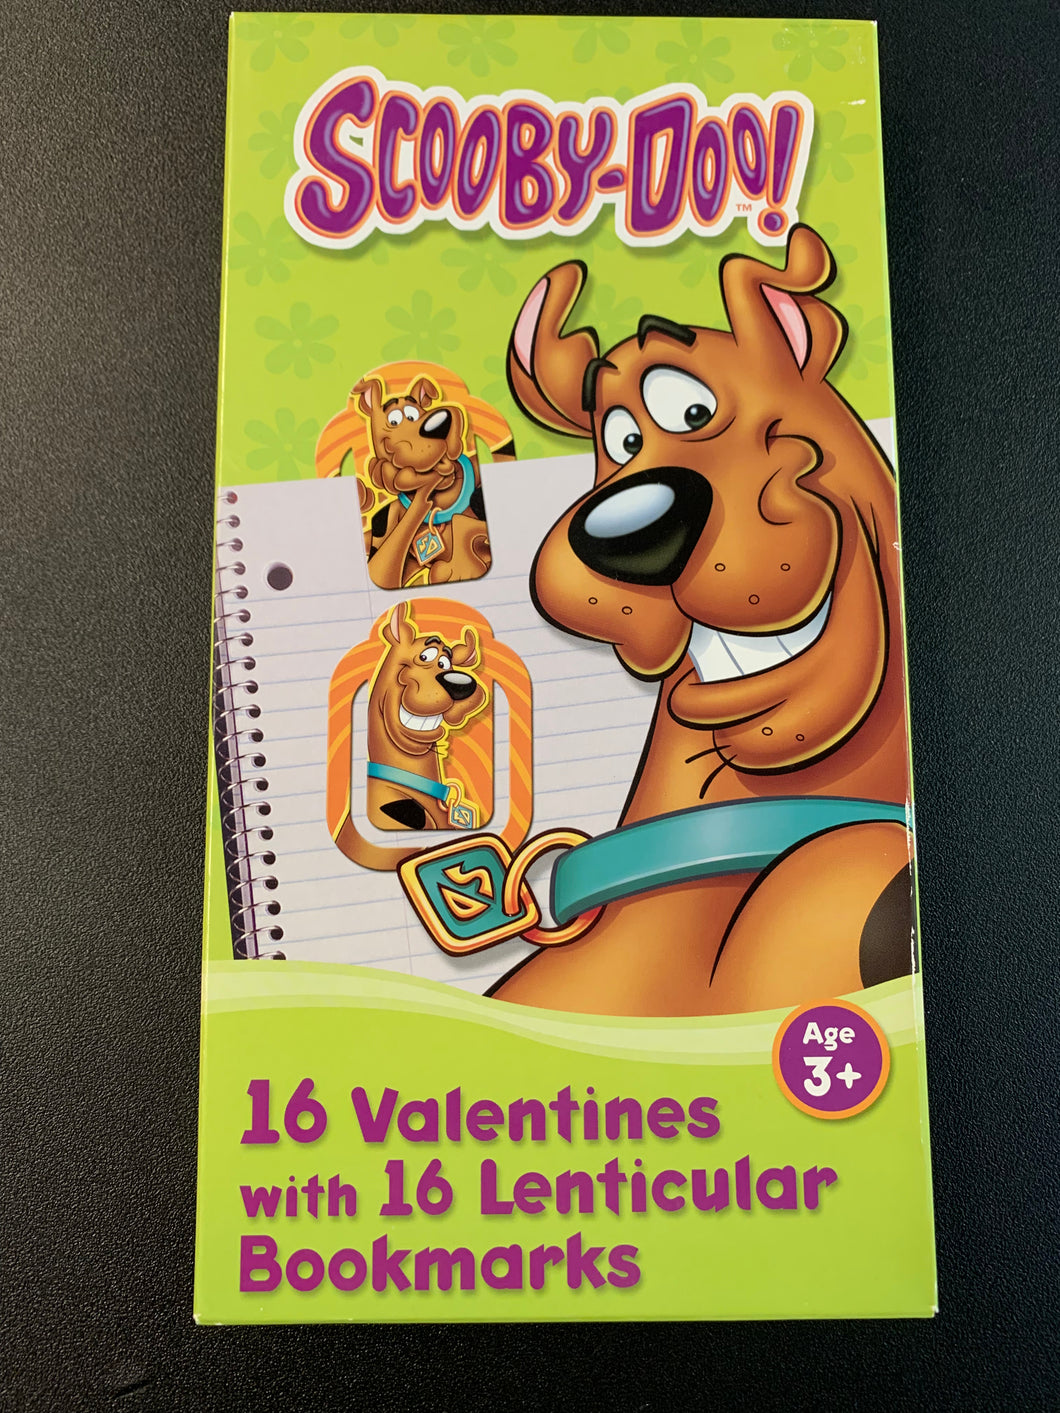 PAPER MAGIC GROUP SCOOBY-DOO 16 VALENTINES WITH BOOKMARKS